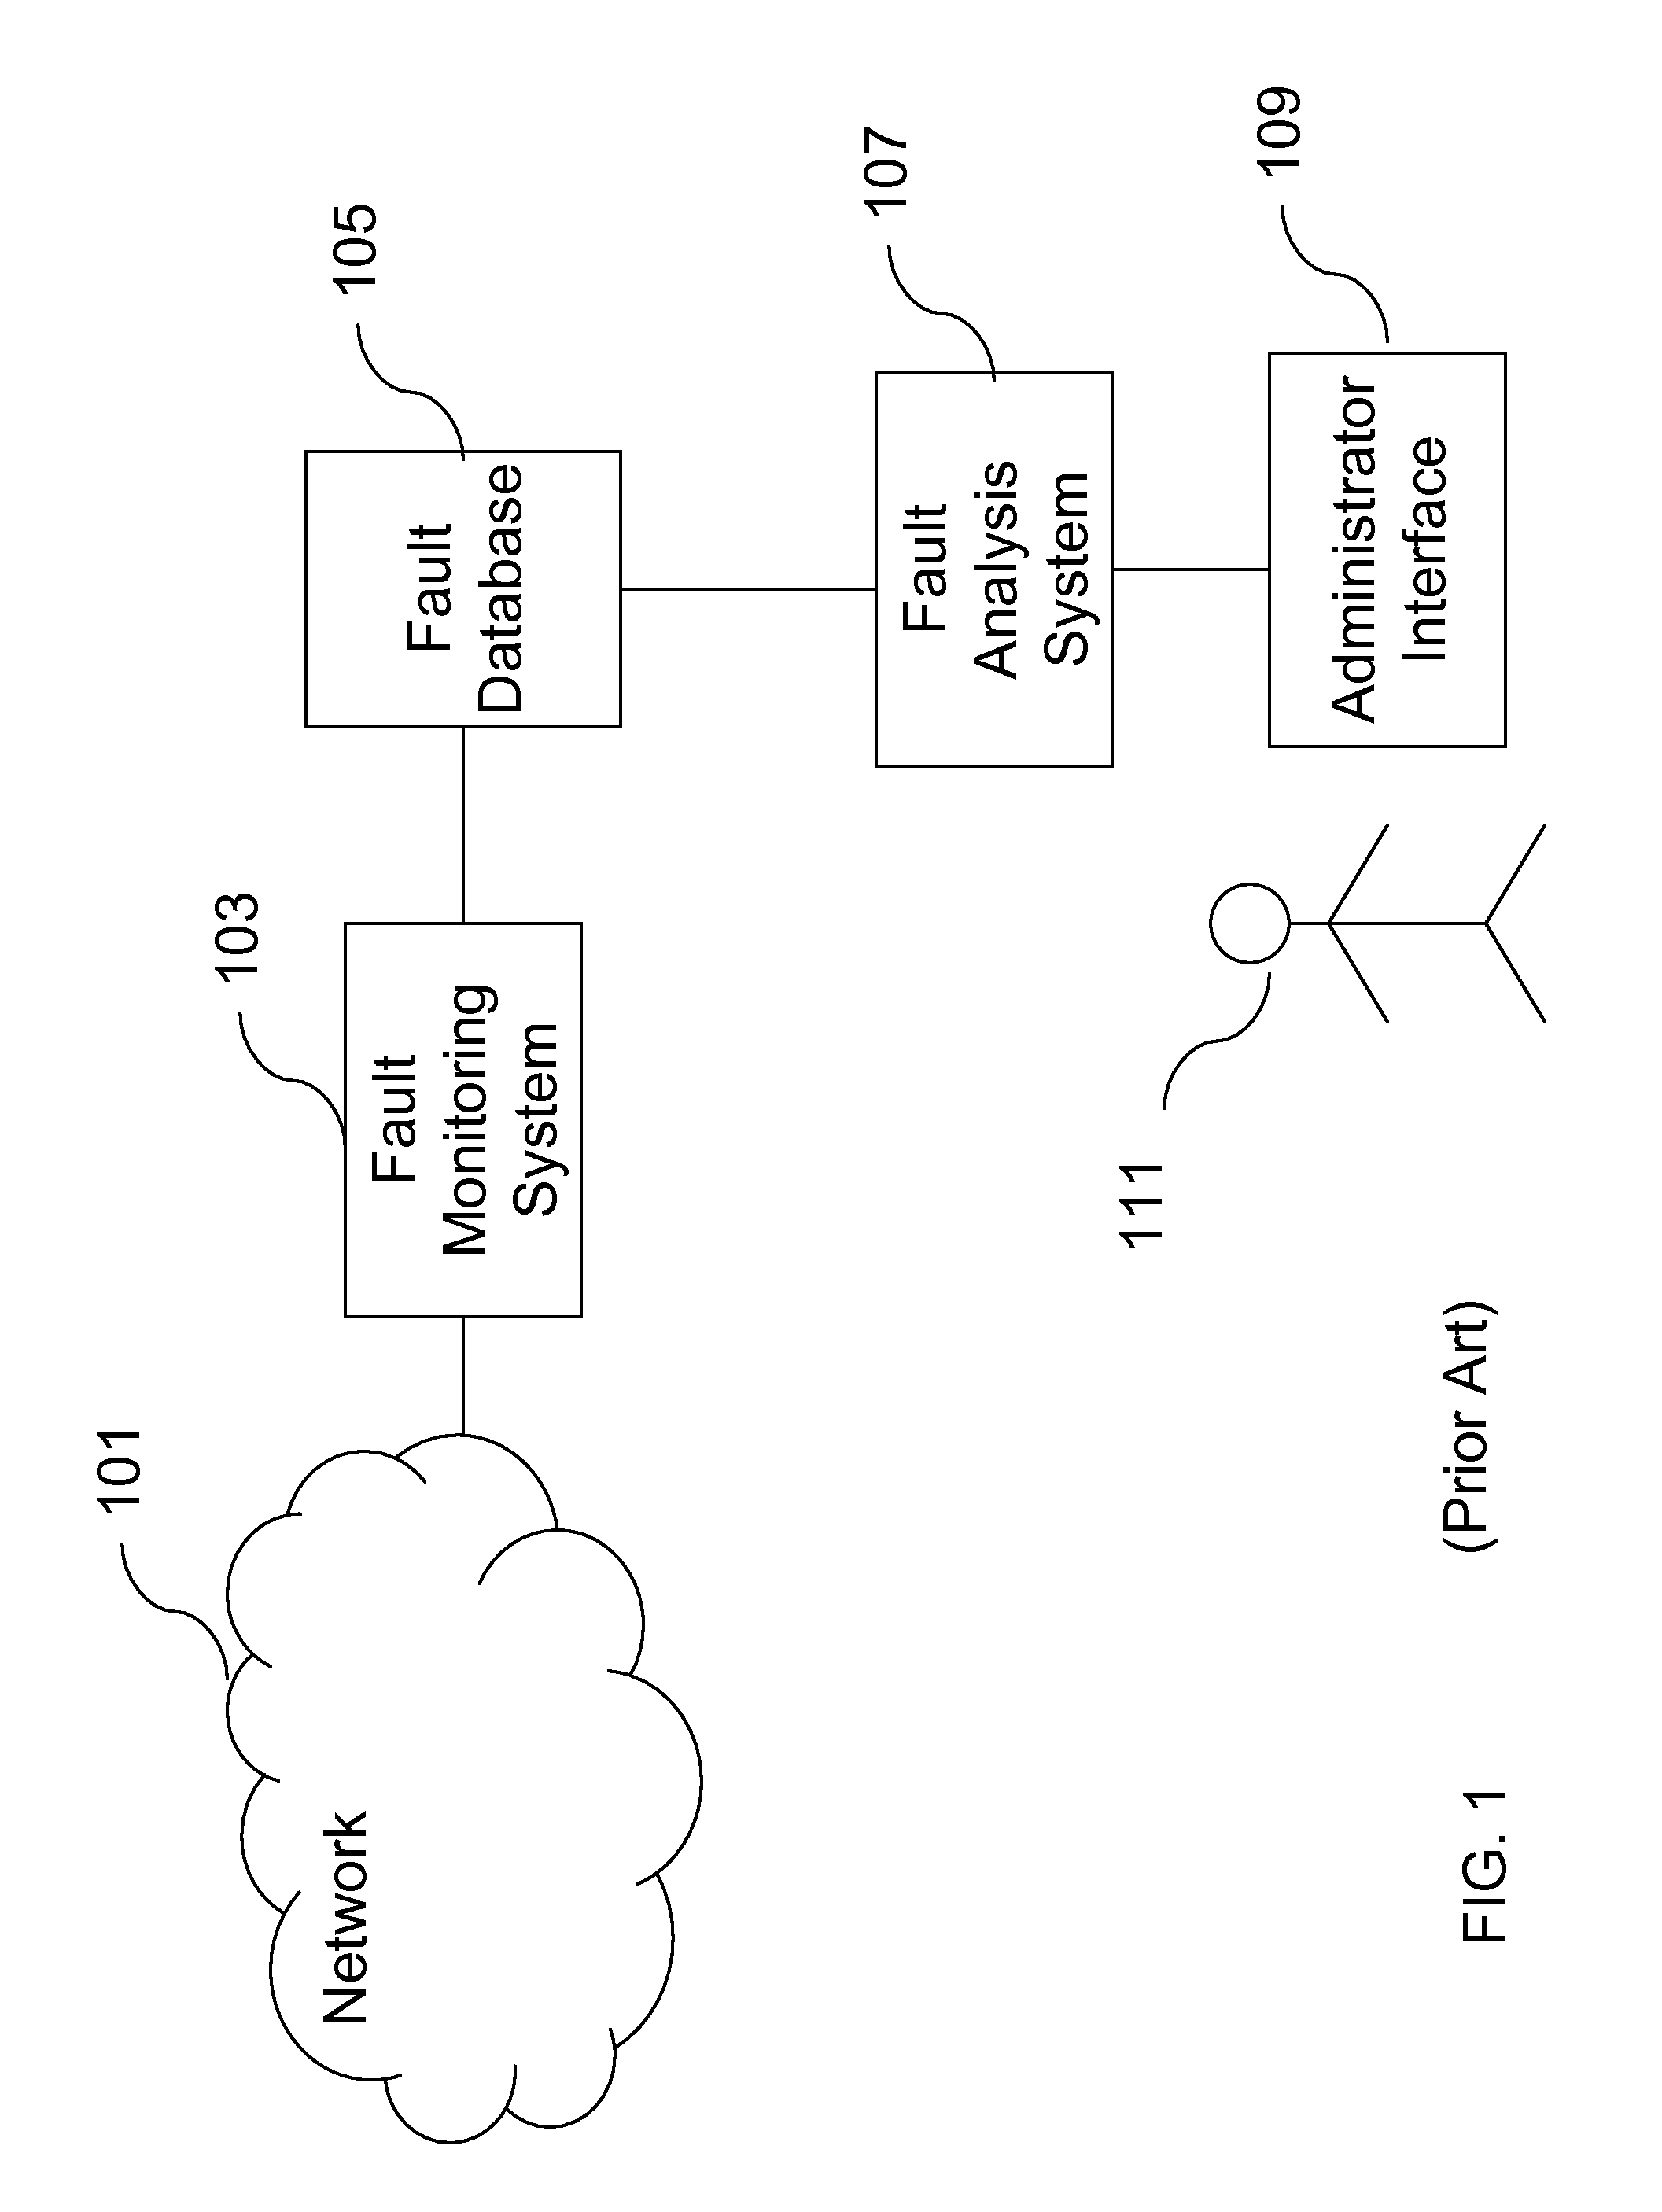 Method and system for providing operator guidance in network and systems management